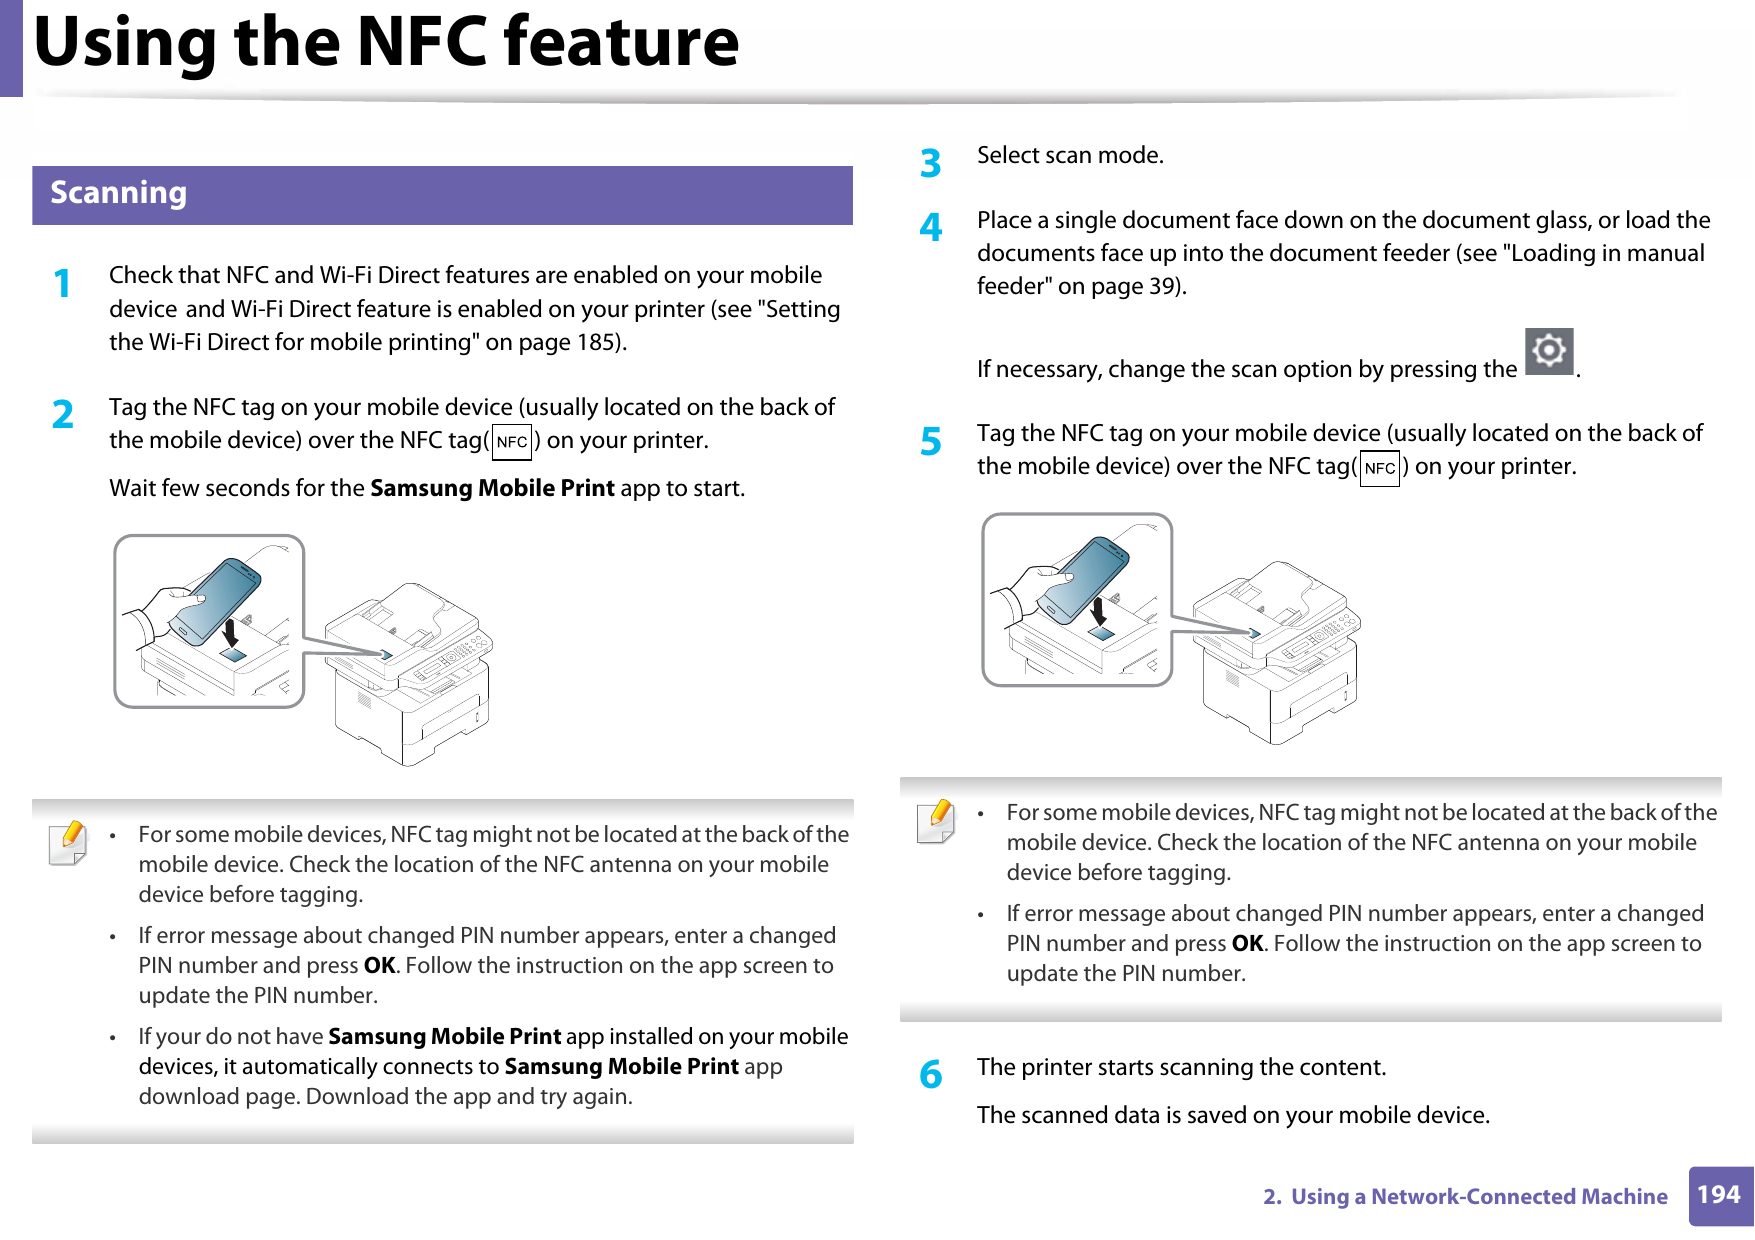 Using the NFC feature1942.  Using a Network-Connected Machine27 Scanning1Check that NFC and Wi-Fi Direct features are enabled on your mobile device and Wi-Fi Direct feature is enabled on your printer (see &quot;Setting the Wi-Fi Direct for mobile printing&quot; on page 185). 2  Tag the NFC tag on your mobile device (usually located on the back of the mobile device) over the NFC tag( ) on your printer.Wait few seconds for the Samsung Mobile Print app to start. • For some mobile devices, NFC tag might not be located at the back of the mobile device. Check the location of the NFC antenna on your mobile device before tagging.• If error message about changed PIN number appears, enter a changed PIN number and press OK. Follow the instruction on the app screen to update the PIN number. • If your do not have Samsung Mobile Print app installed on your mobile devices, it automatically connects to Samsung Mobile Print app download page. Download the app and try again. 3  Select scan mode.4  Place a single document face down on the document glass, or load the documents face up into the document feeder (see &quot;Loading in manual feeder&quot; on page 39).If necessary, change the scan option by pressing the  .5  Tag the NFC tag on your mobile device (usually located on the back of the mobile device) over the NFC tag( ) on your printer. • For some mobile devices, NFC tag might not be located at the back of the mobile device. Check the location of the NFC antenna on your mobile device before tagging.• If error message about changed PIN number appears, enter a changed PIN number and press OK. Follow the instruction on the app screen to update the PIN number.  6  The printer starts scanning the content.The scanned data is saved on your mobile device.